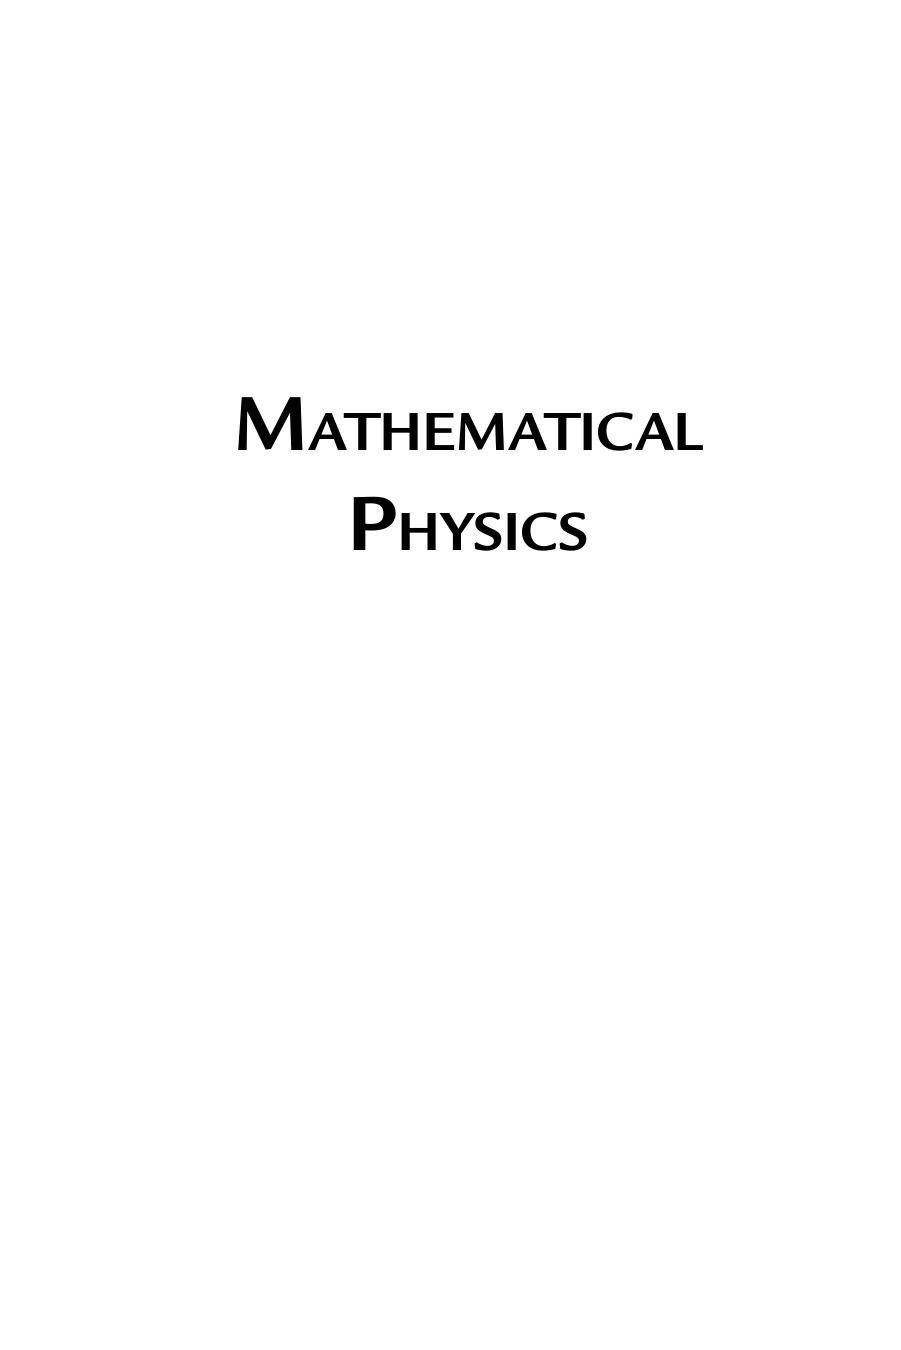 Mathematical physics (Mathematical Methods for Physical Science) 2019 ( PDFDrive.com )